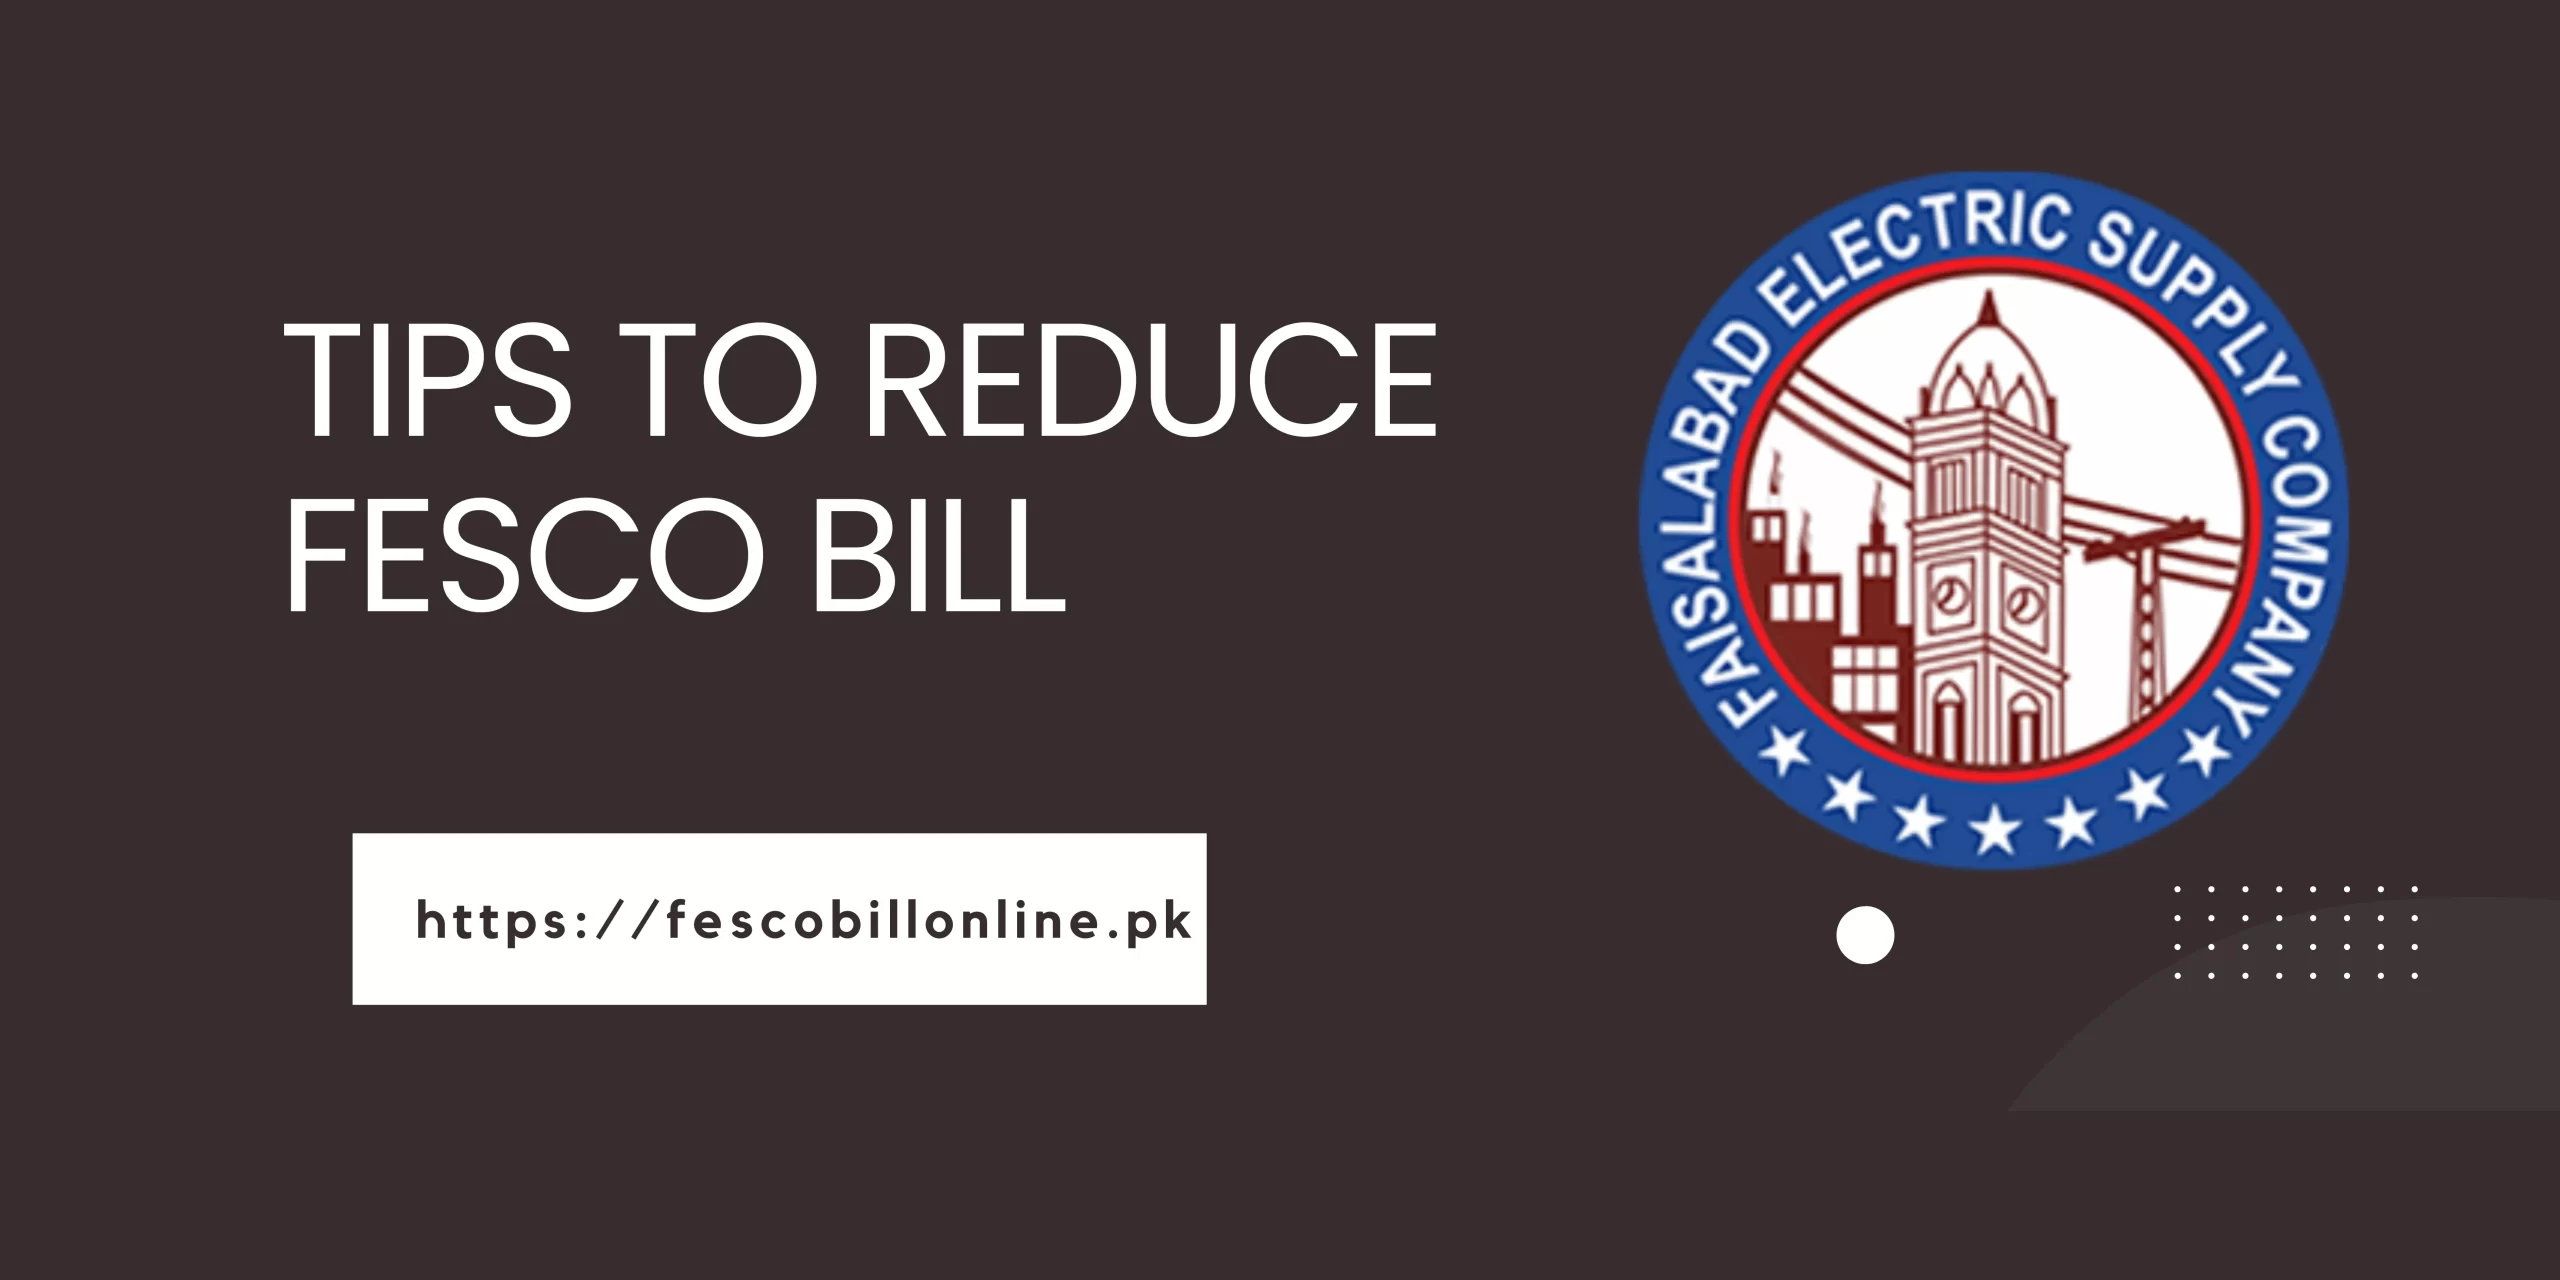 Tips to reduce FESCO electricity bill